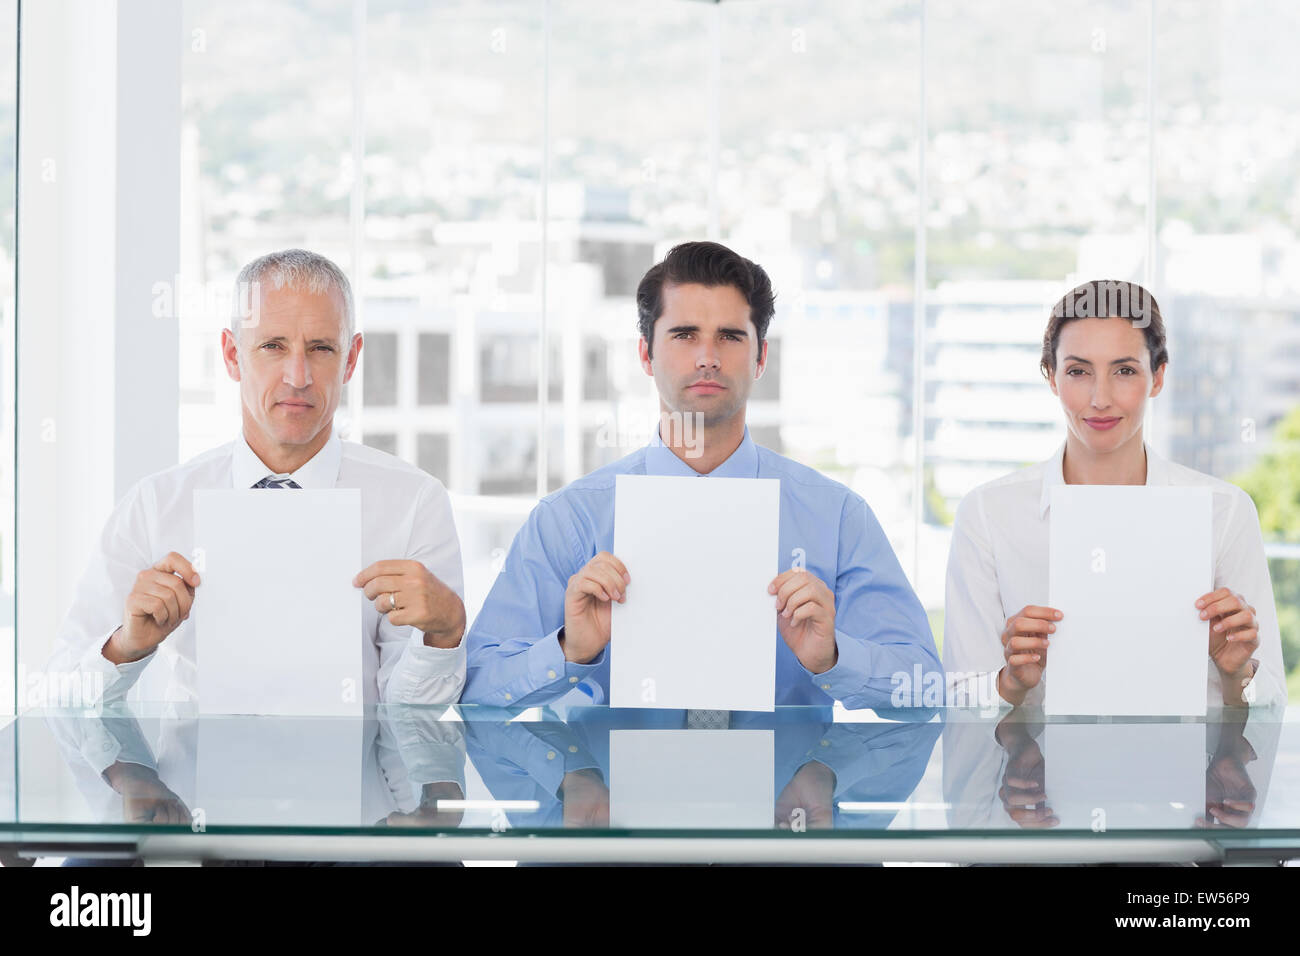 Smiling business team showing paper Stock Photo